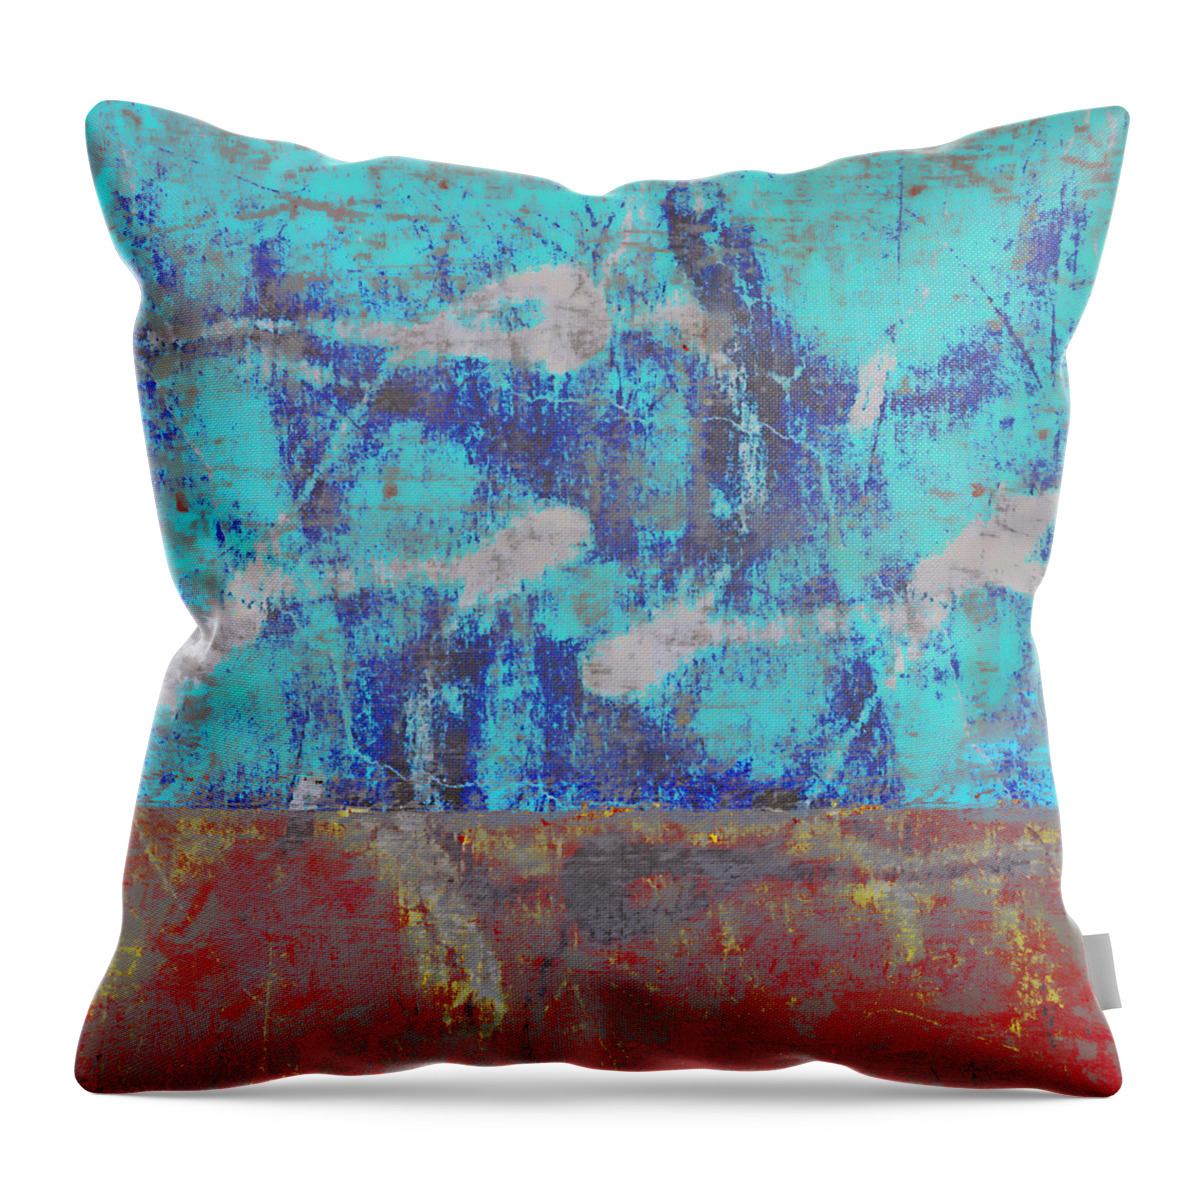 Abstract Throw Pillow featuring the photograph Colorful Walls Square Number 1 by Carol Leigh